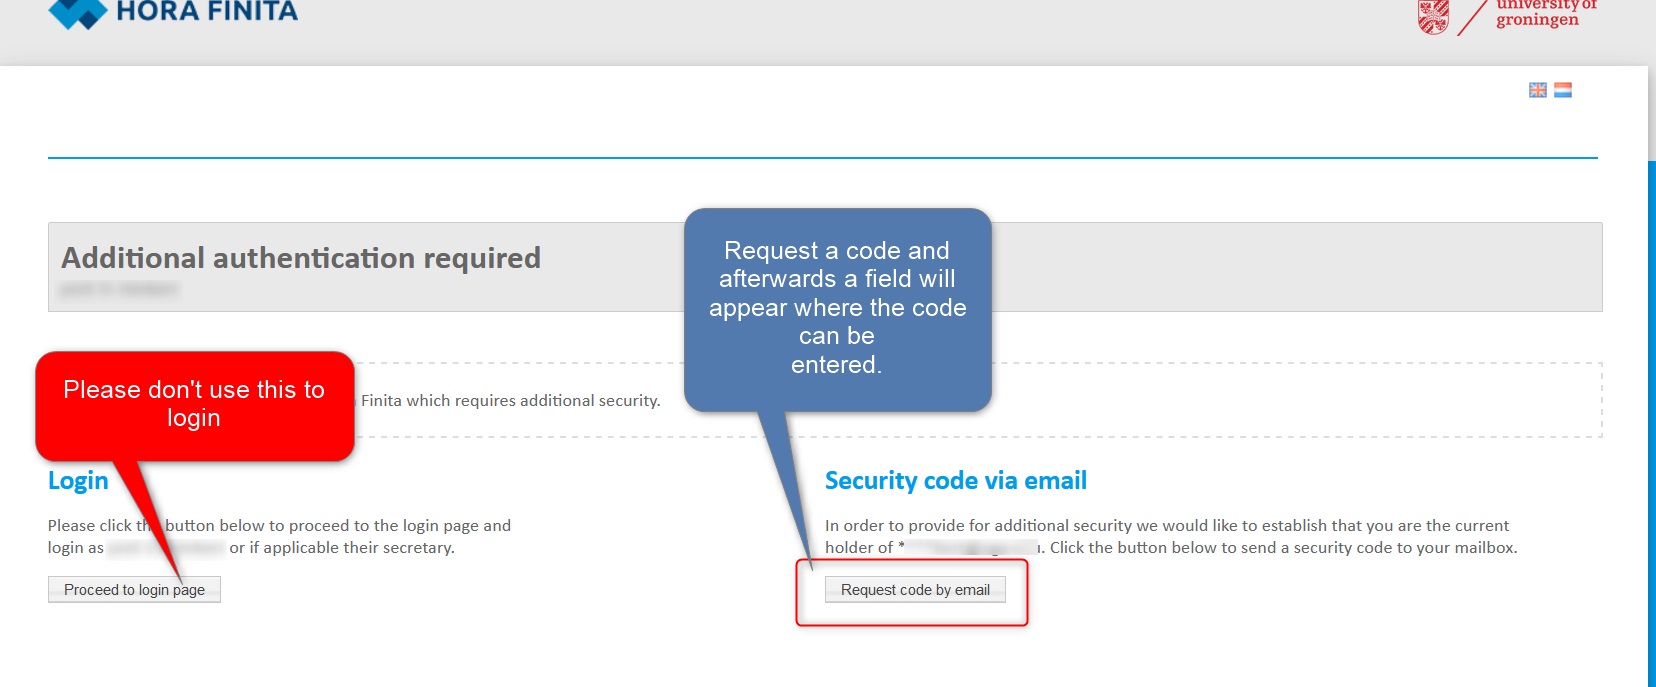 security-code-via-email